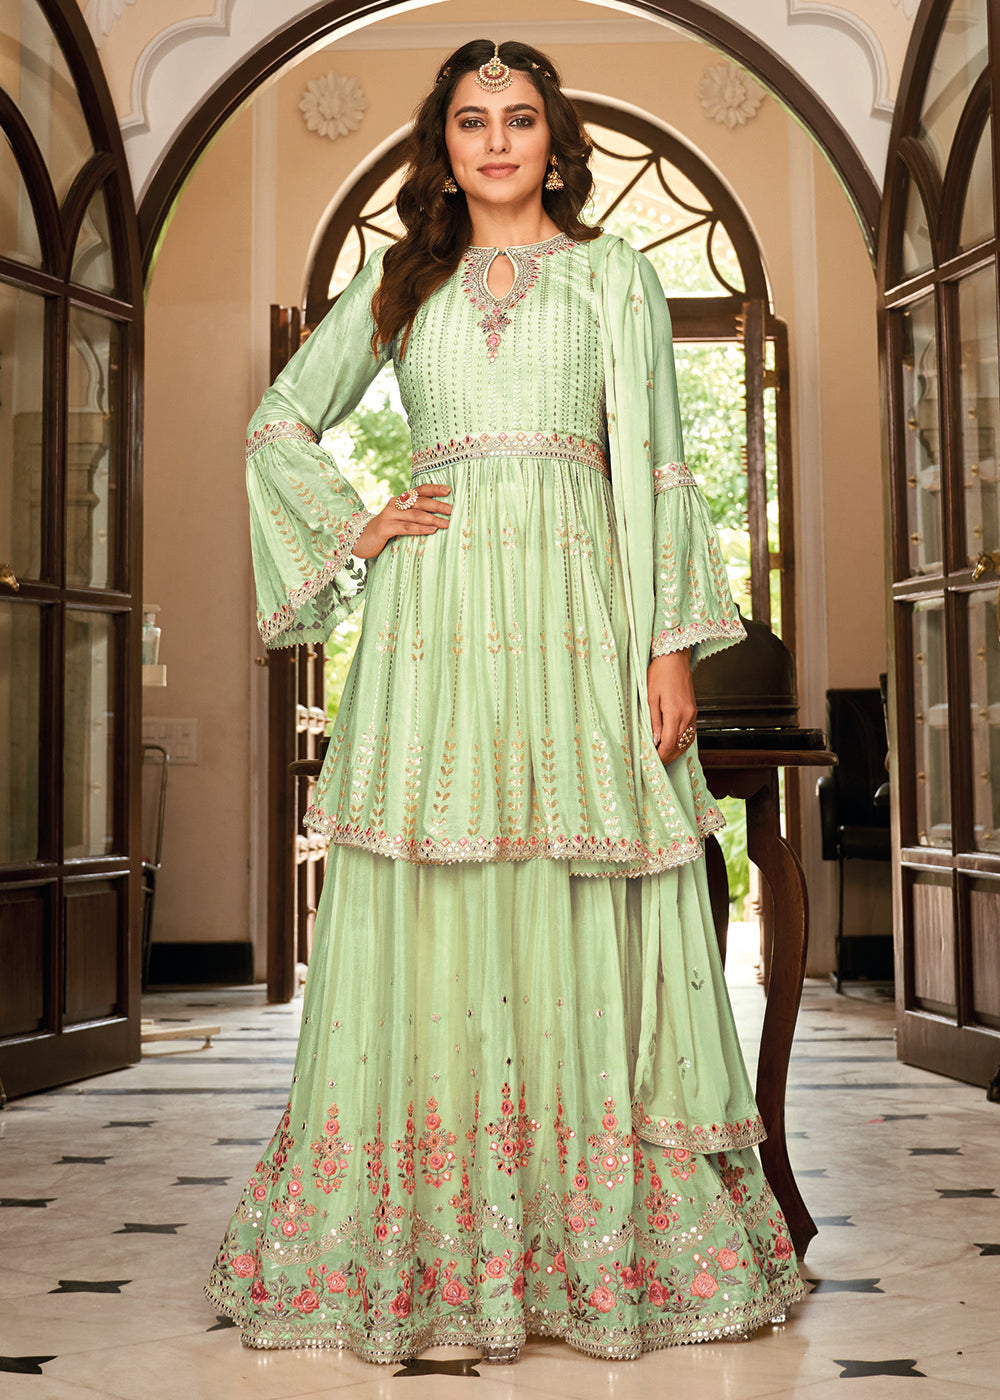 Buy Now Sharara Top Style Green Heavy Chinon Lehenga Skirt Suit Online in USA, UK, Canada & Worldwide at Empress Clothing.